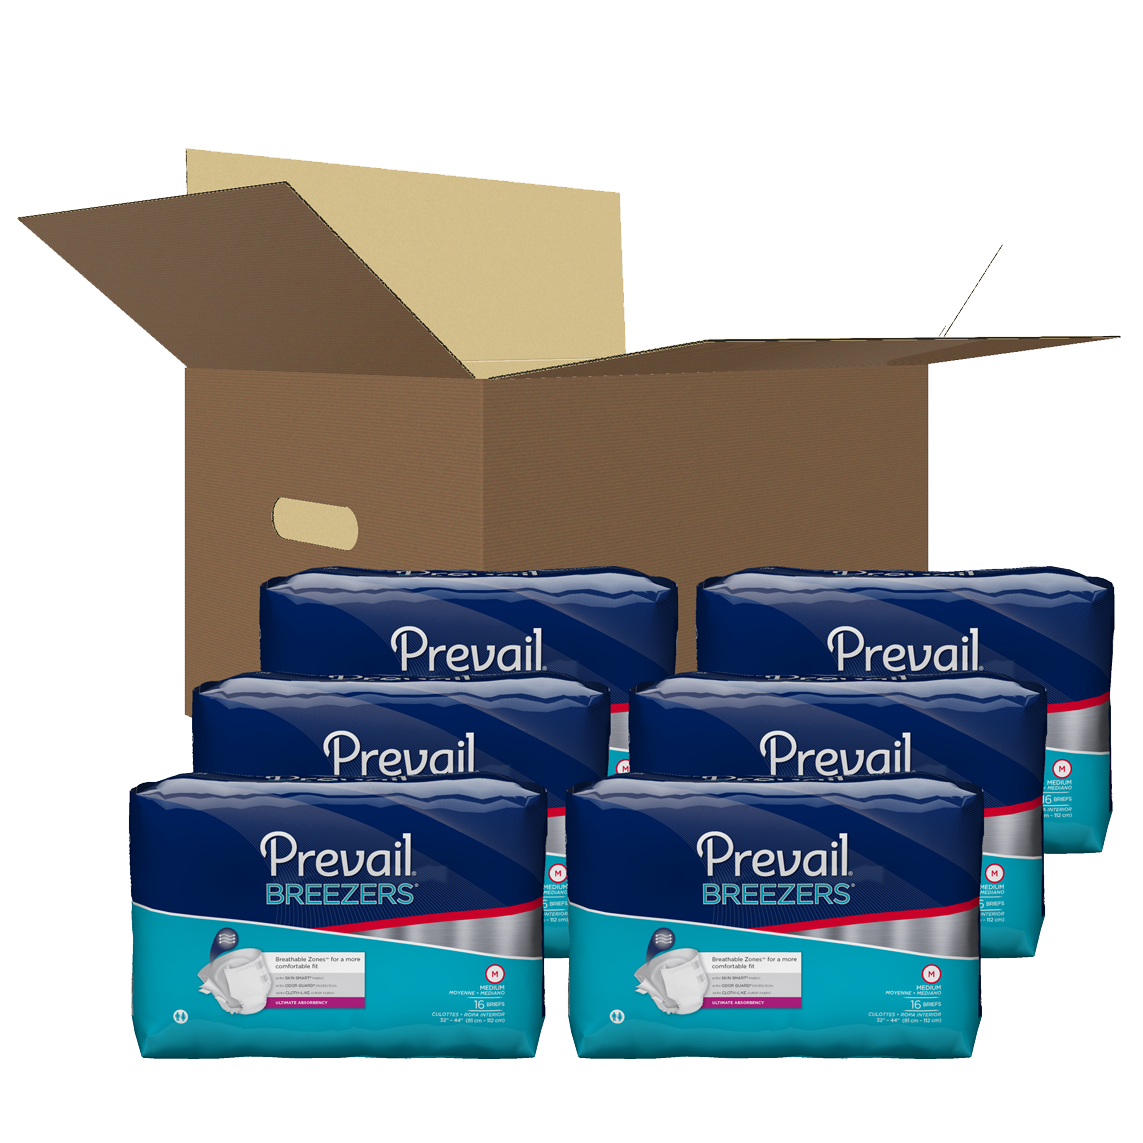 Adult diapers for heavy urinary incontinence